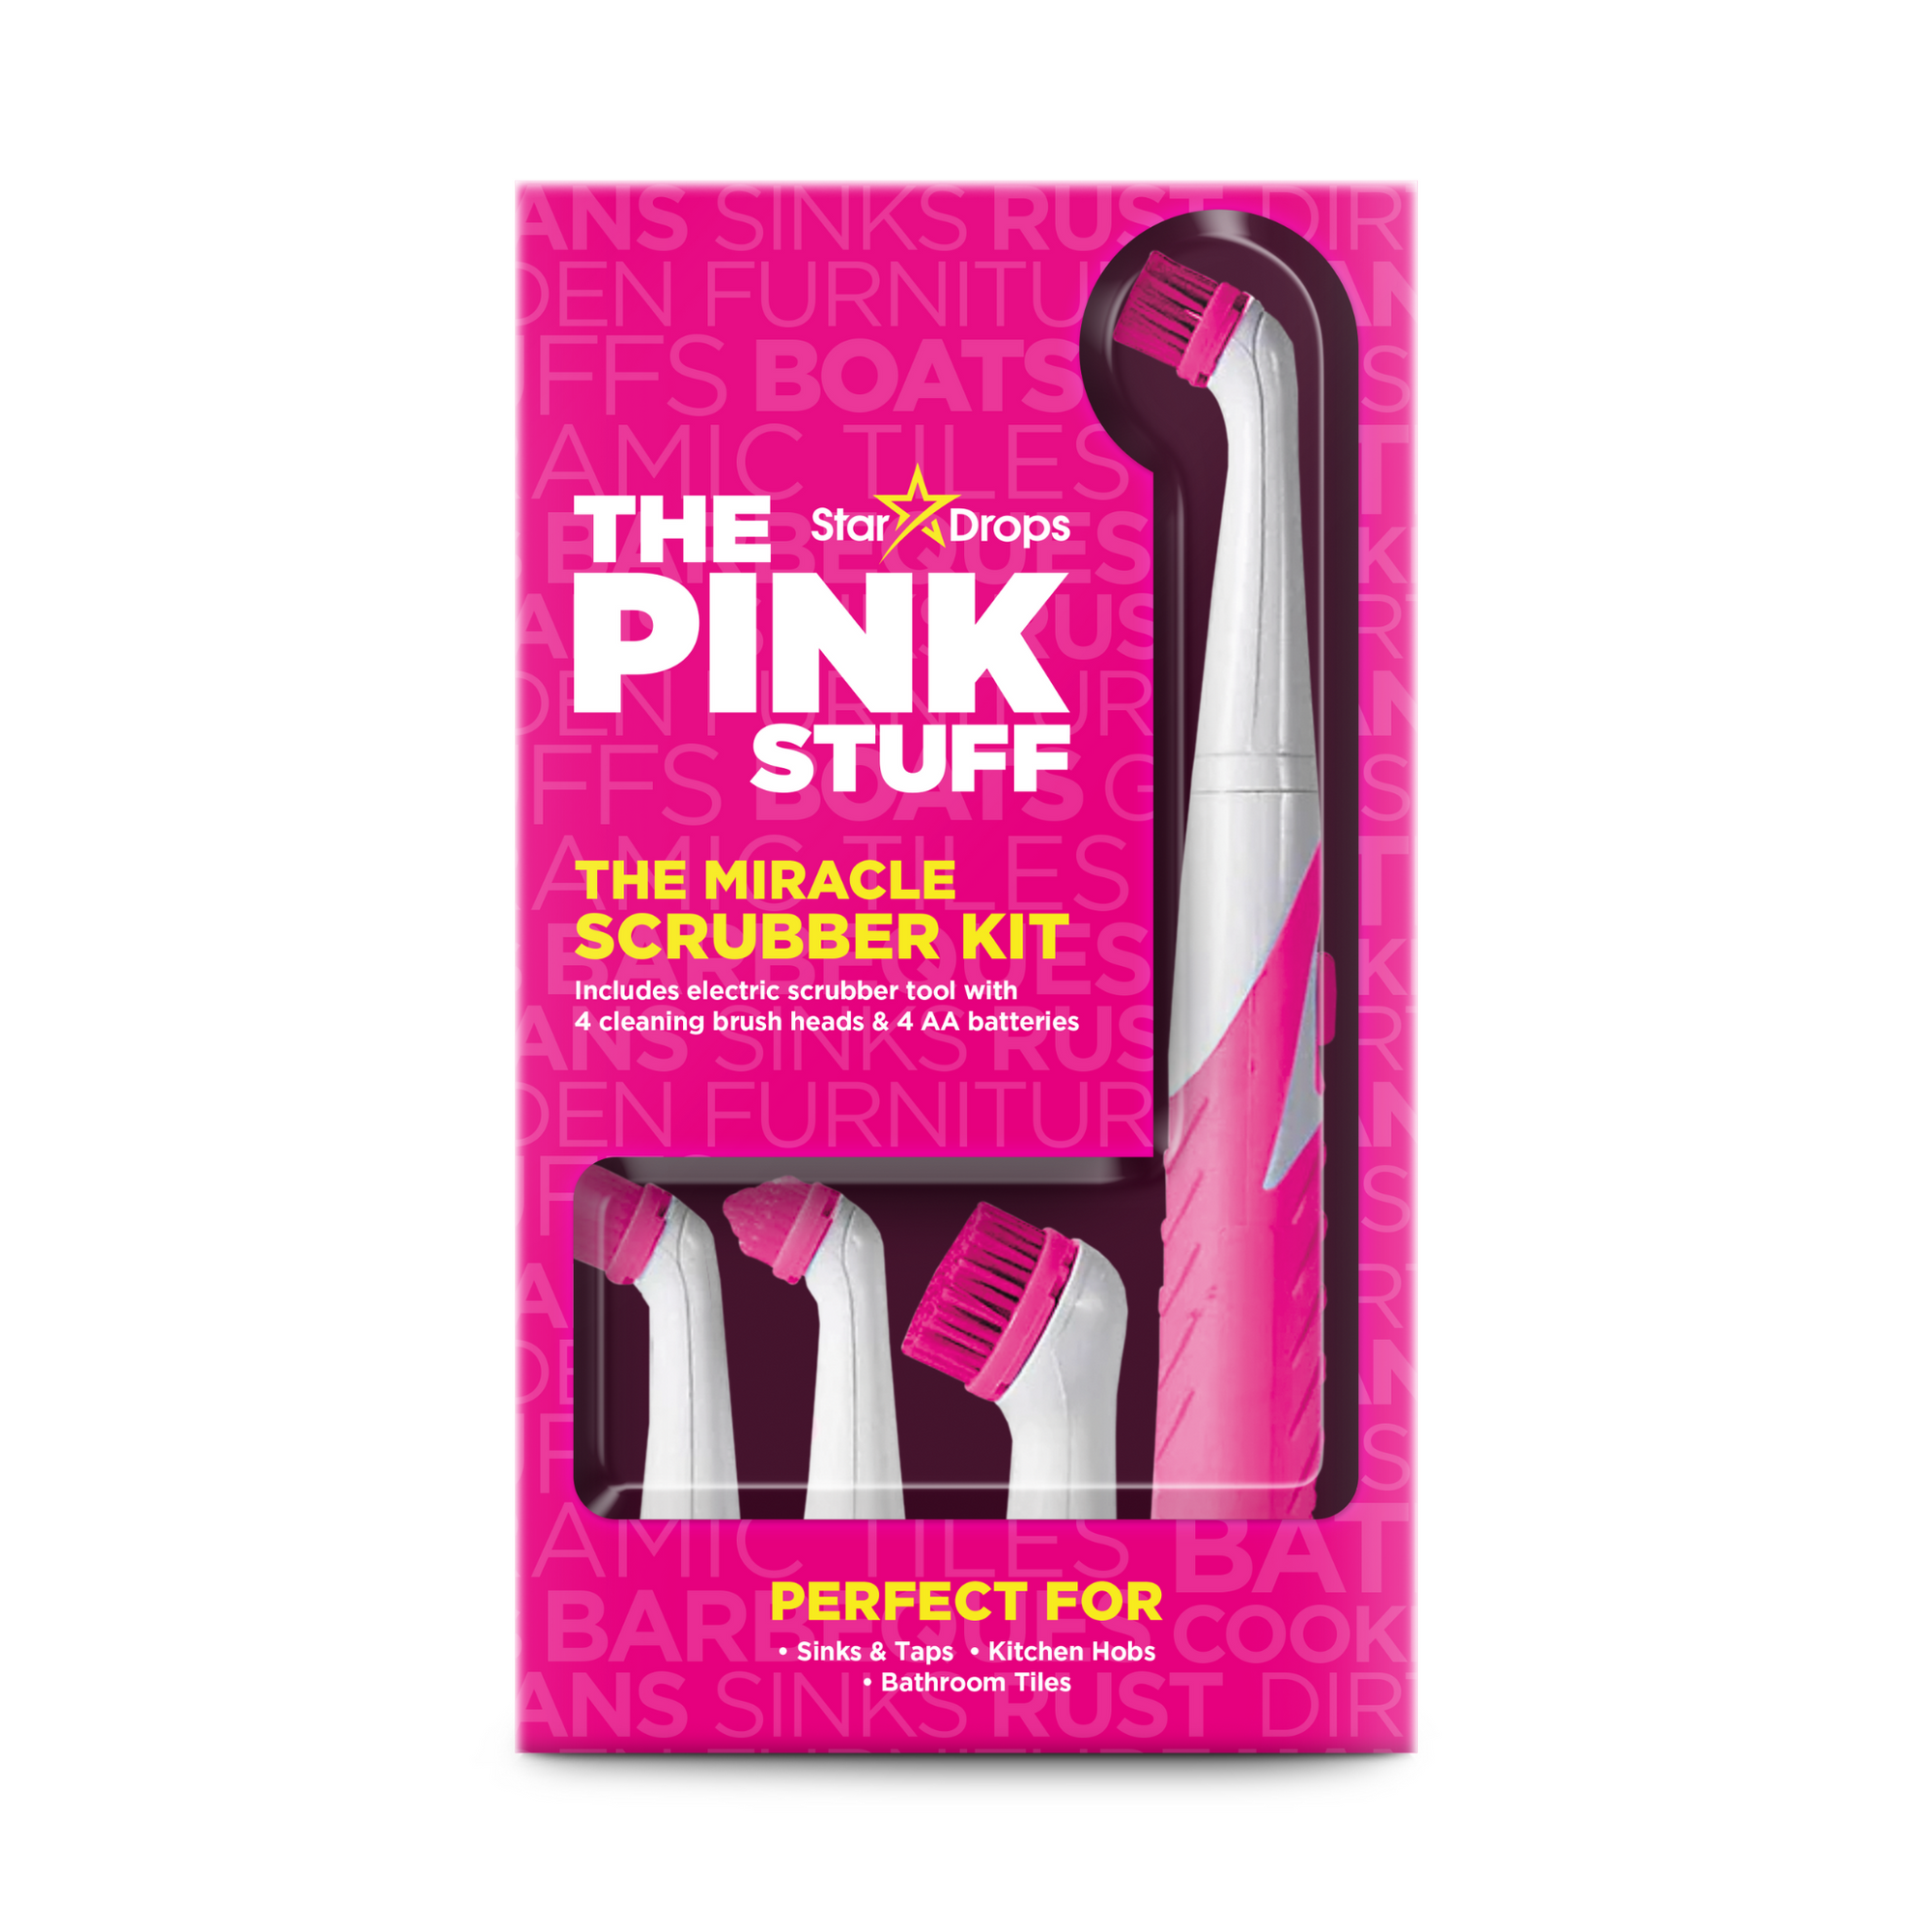 The Pink Stuff - The Miracle Scrubber Kit